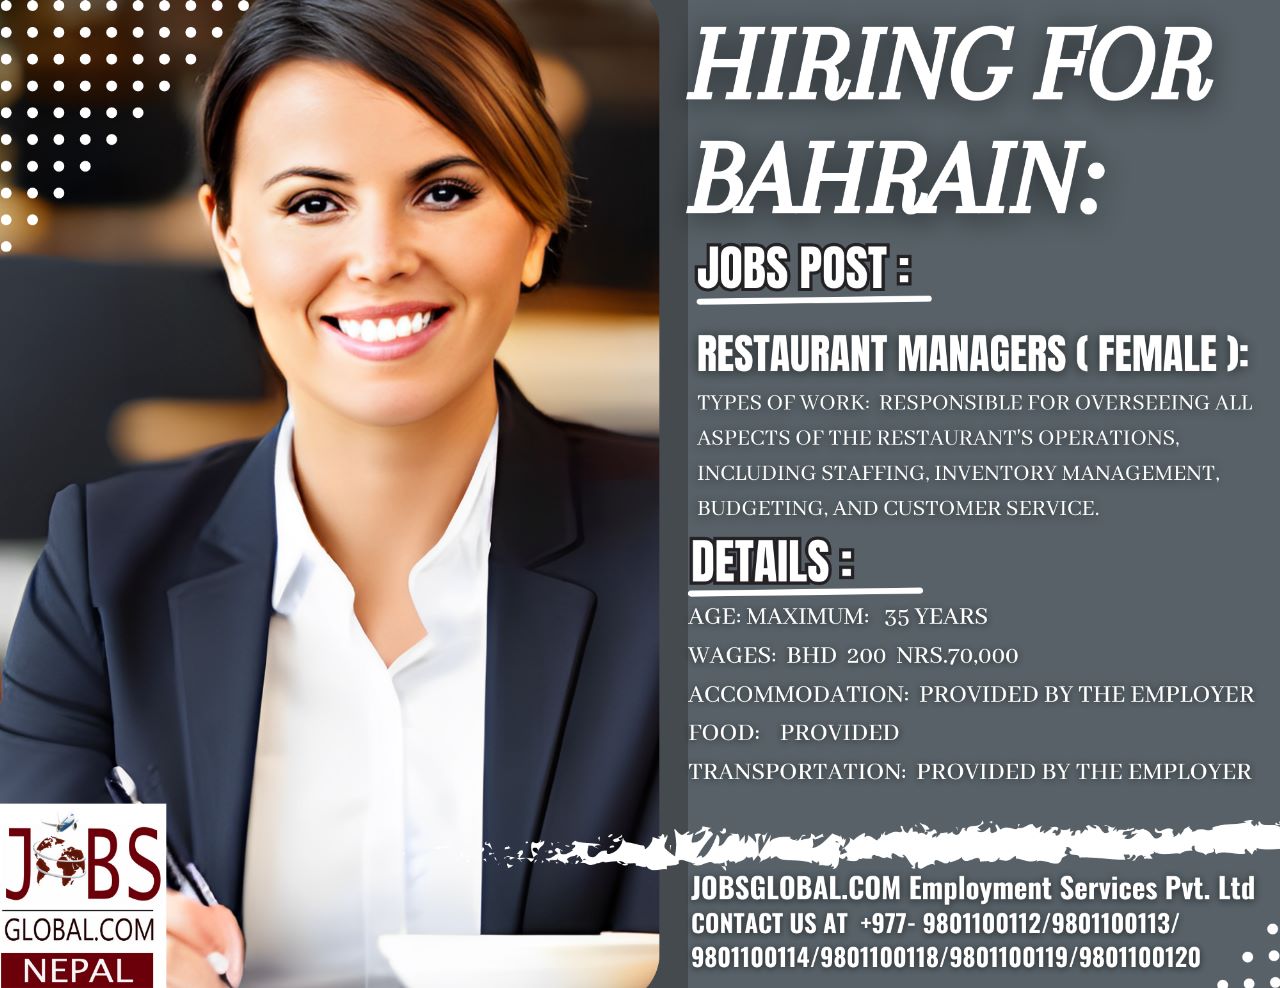 Restaurant Managers (Female) Job Demand From Bahrain, New Job Vacancy for Bahrain Demand for Restaurant Managers (Female)